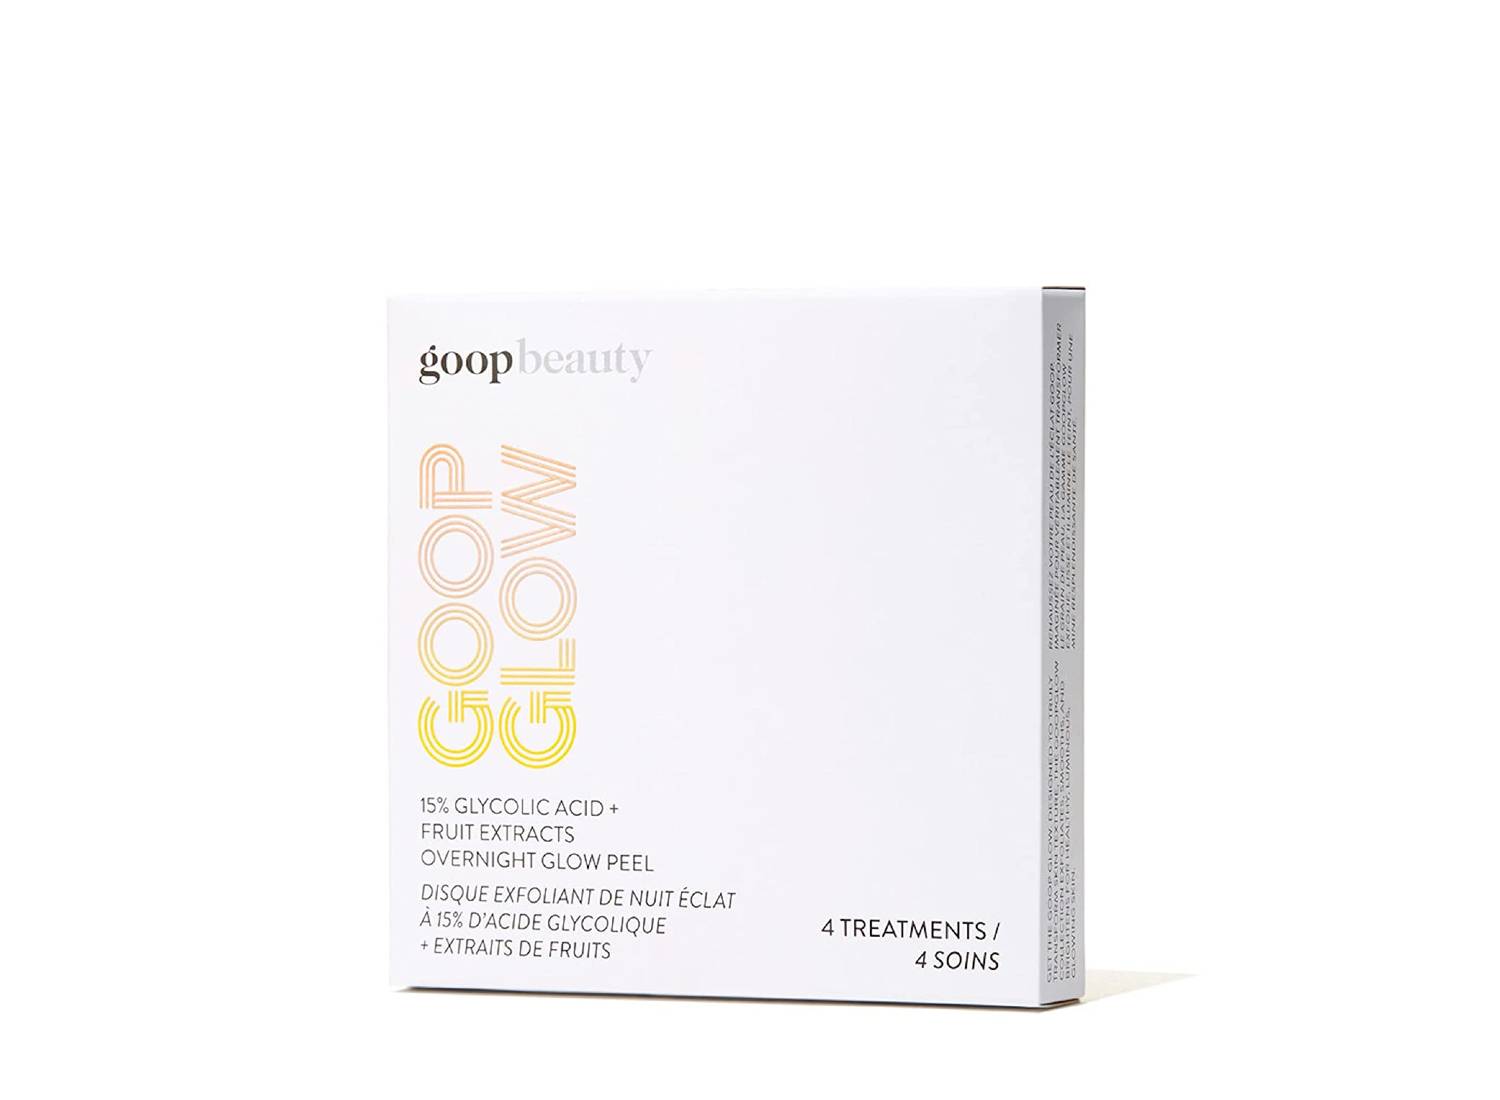 Box of goop's goopglow glycolic acerb  overnight peel pads for face